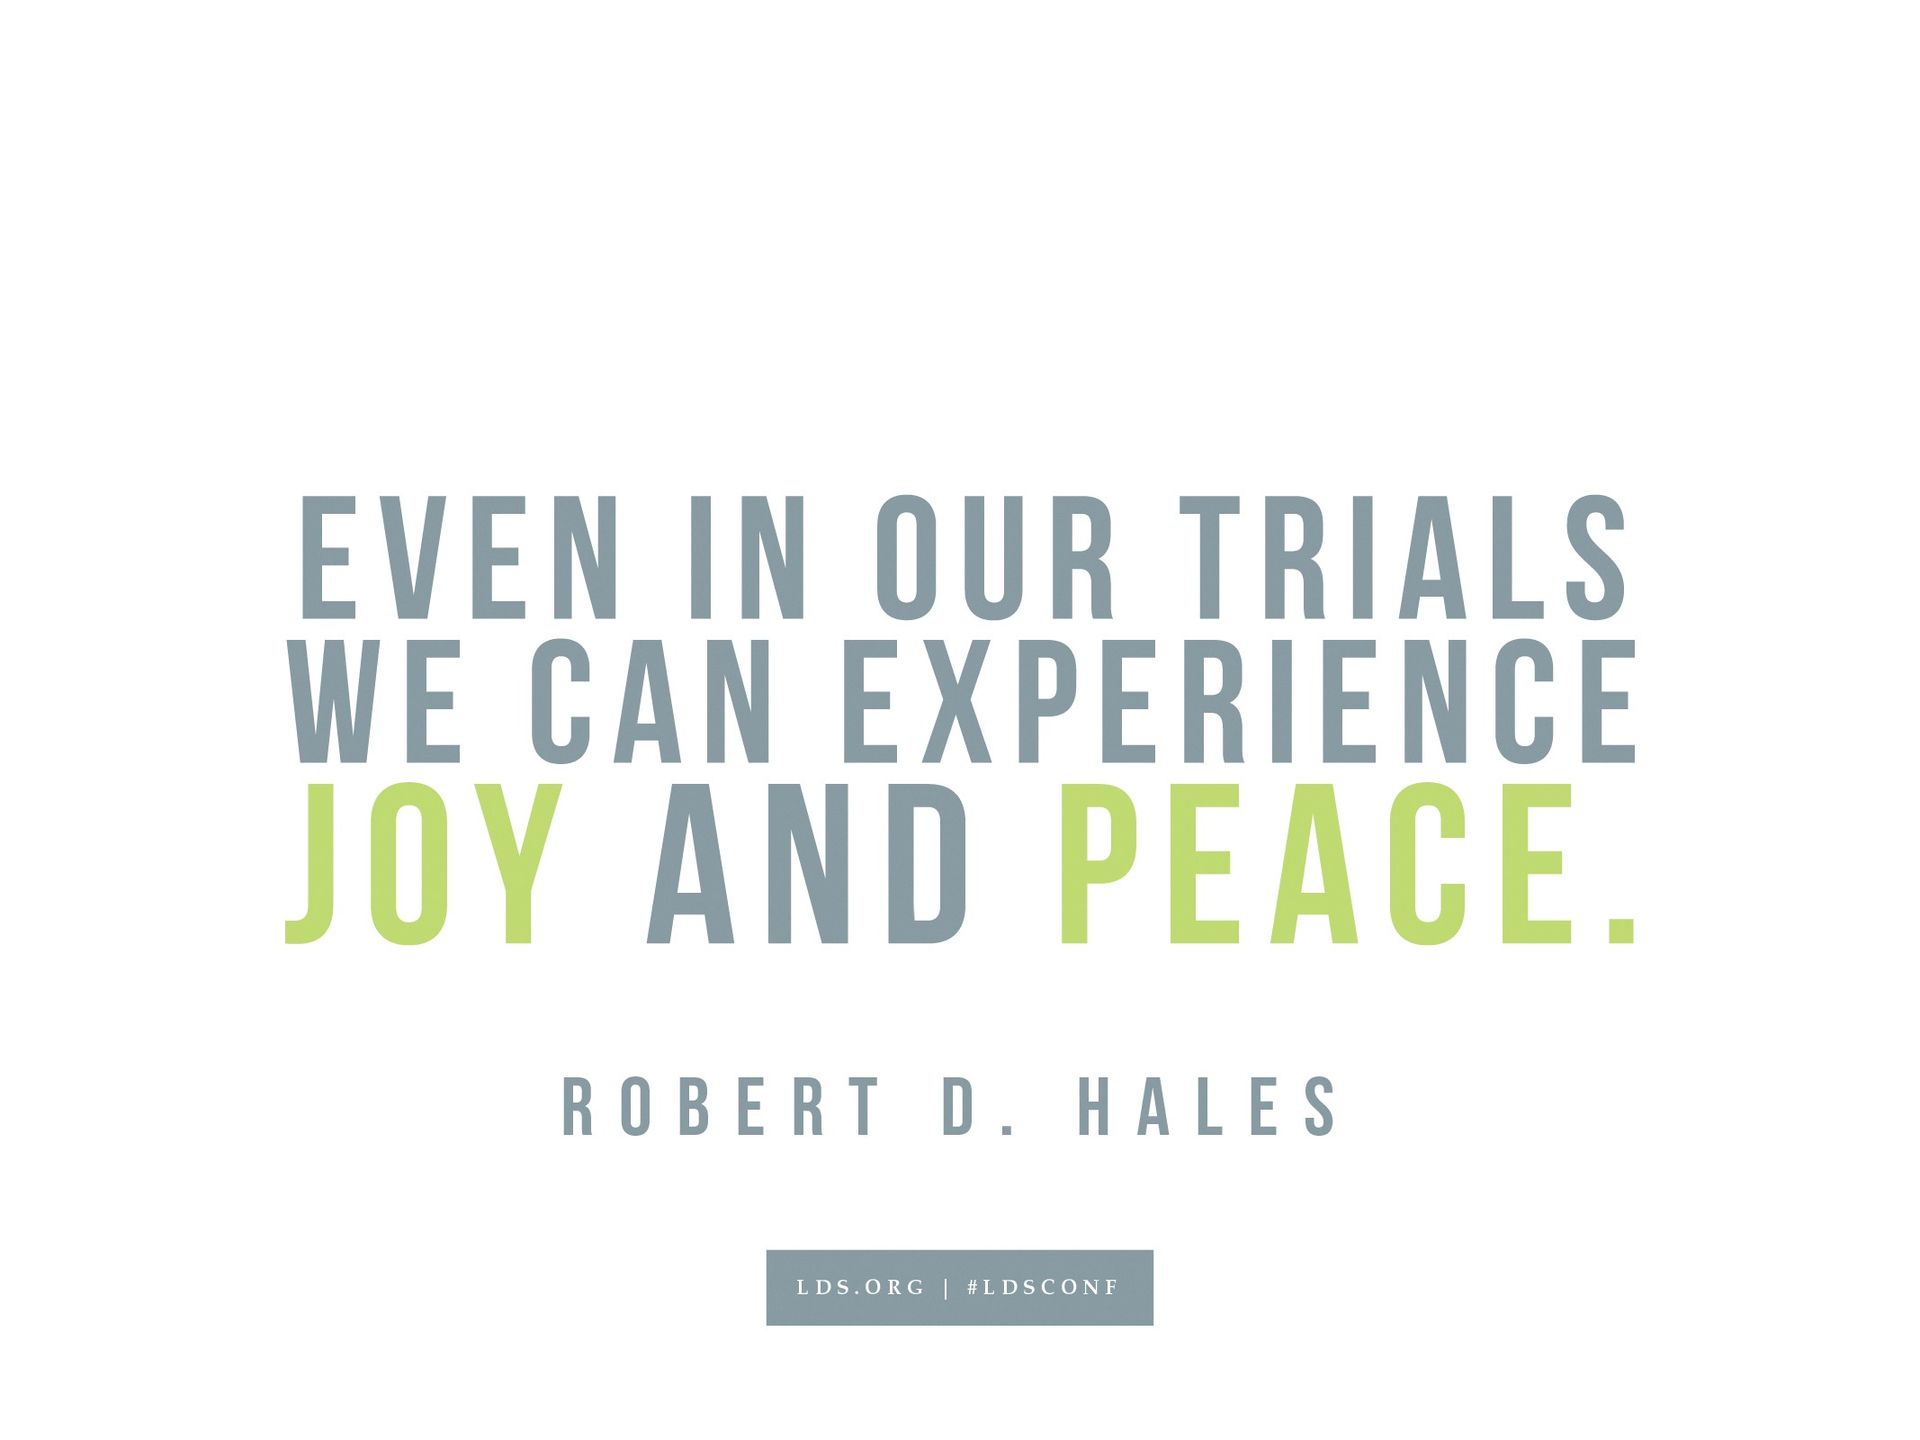 “Even in our trials we can experience joy and peace.”—Robert D. Hales, “‘Come, Follow Me’ by Practicing Christian Love and Service”